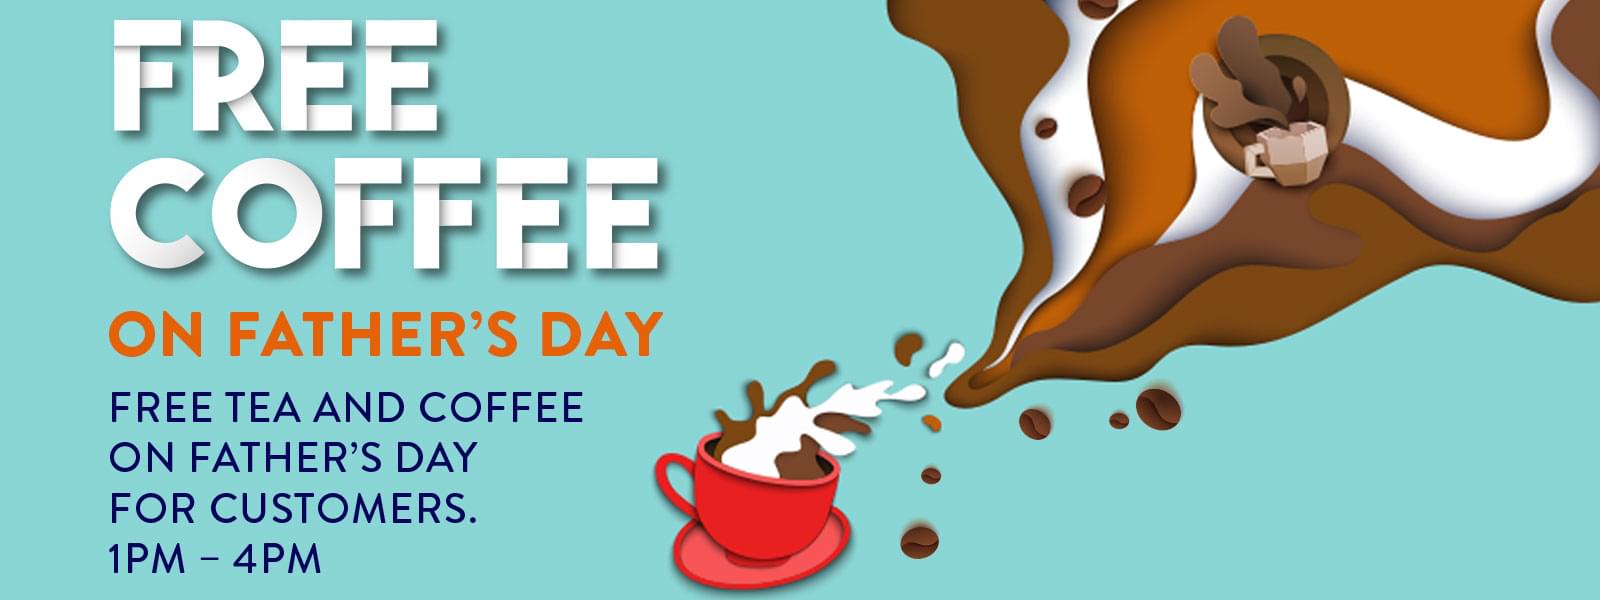 Free Coffee on Father’s Day!